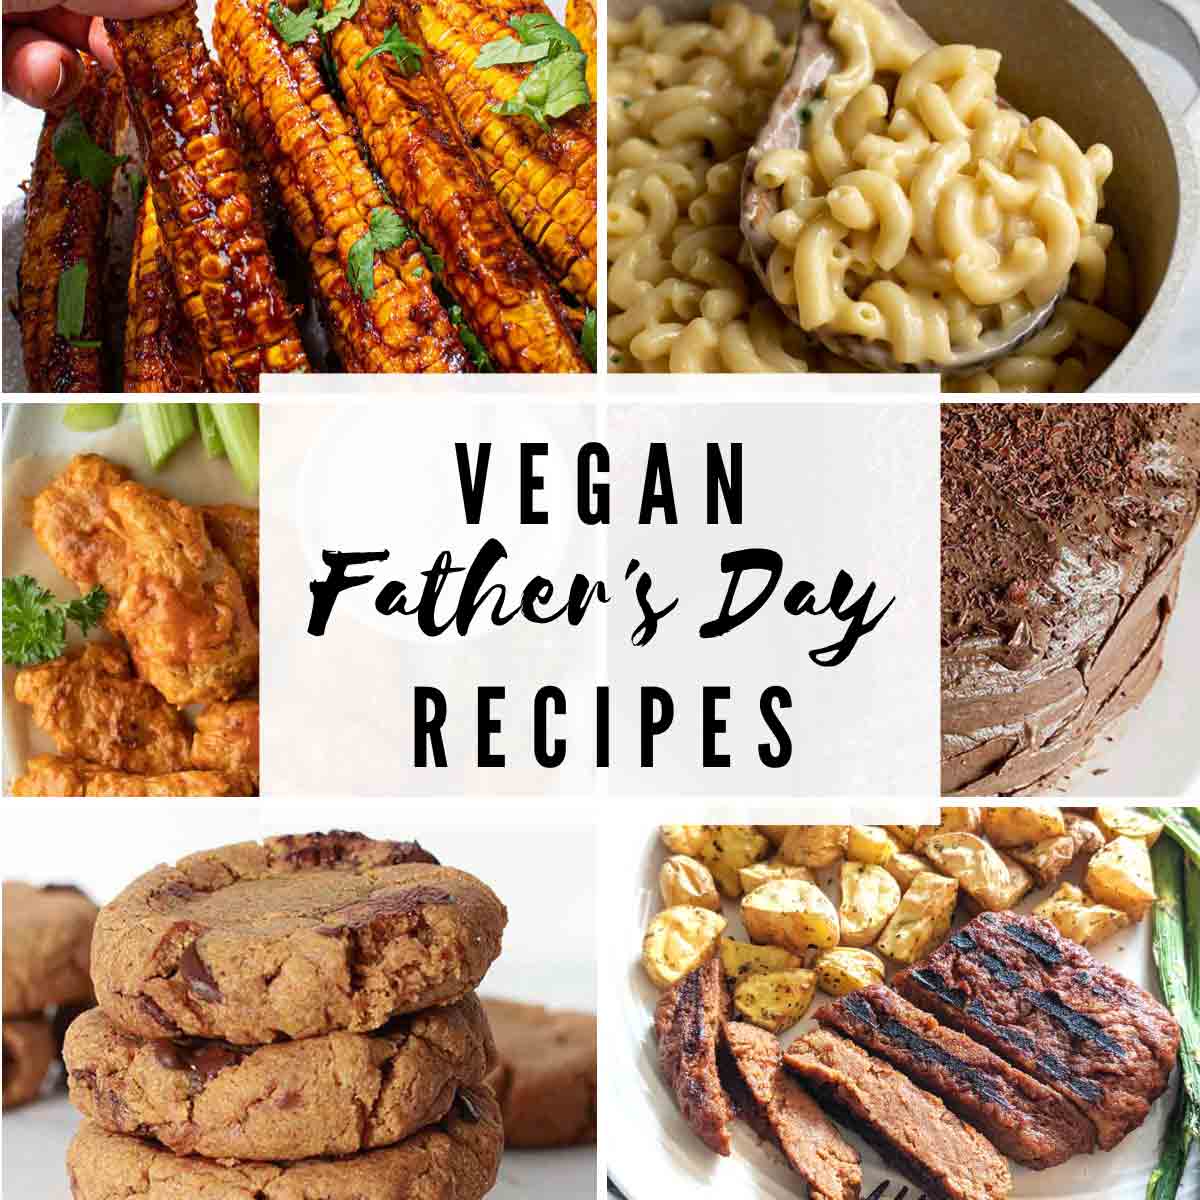 Image Collage Of 6 Vegan Fathers Day Recipes With Text Overlay